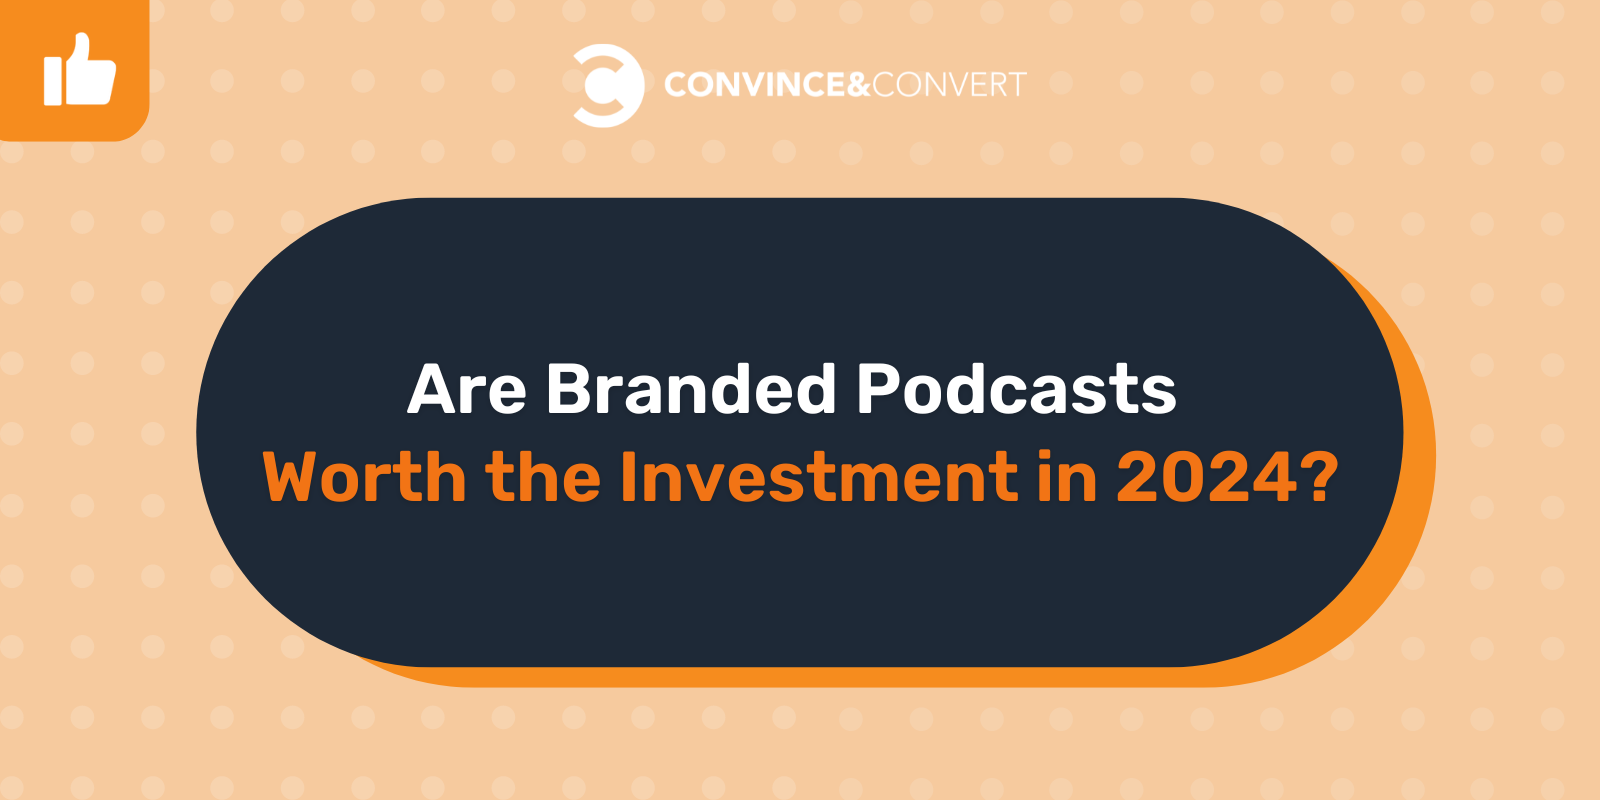 Are Branded Podcasts Worth the Investment?